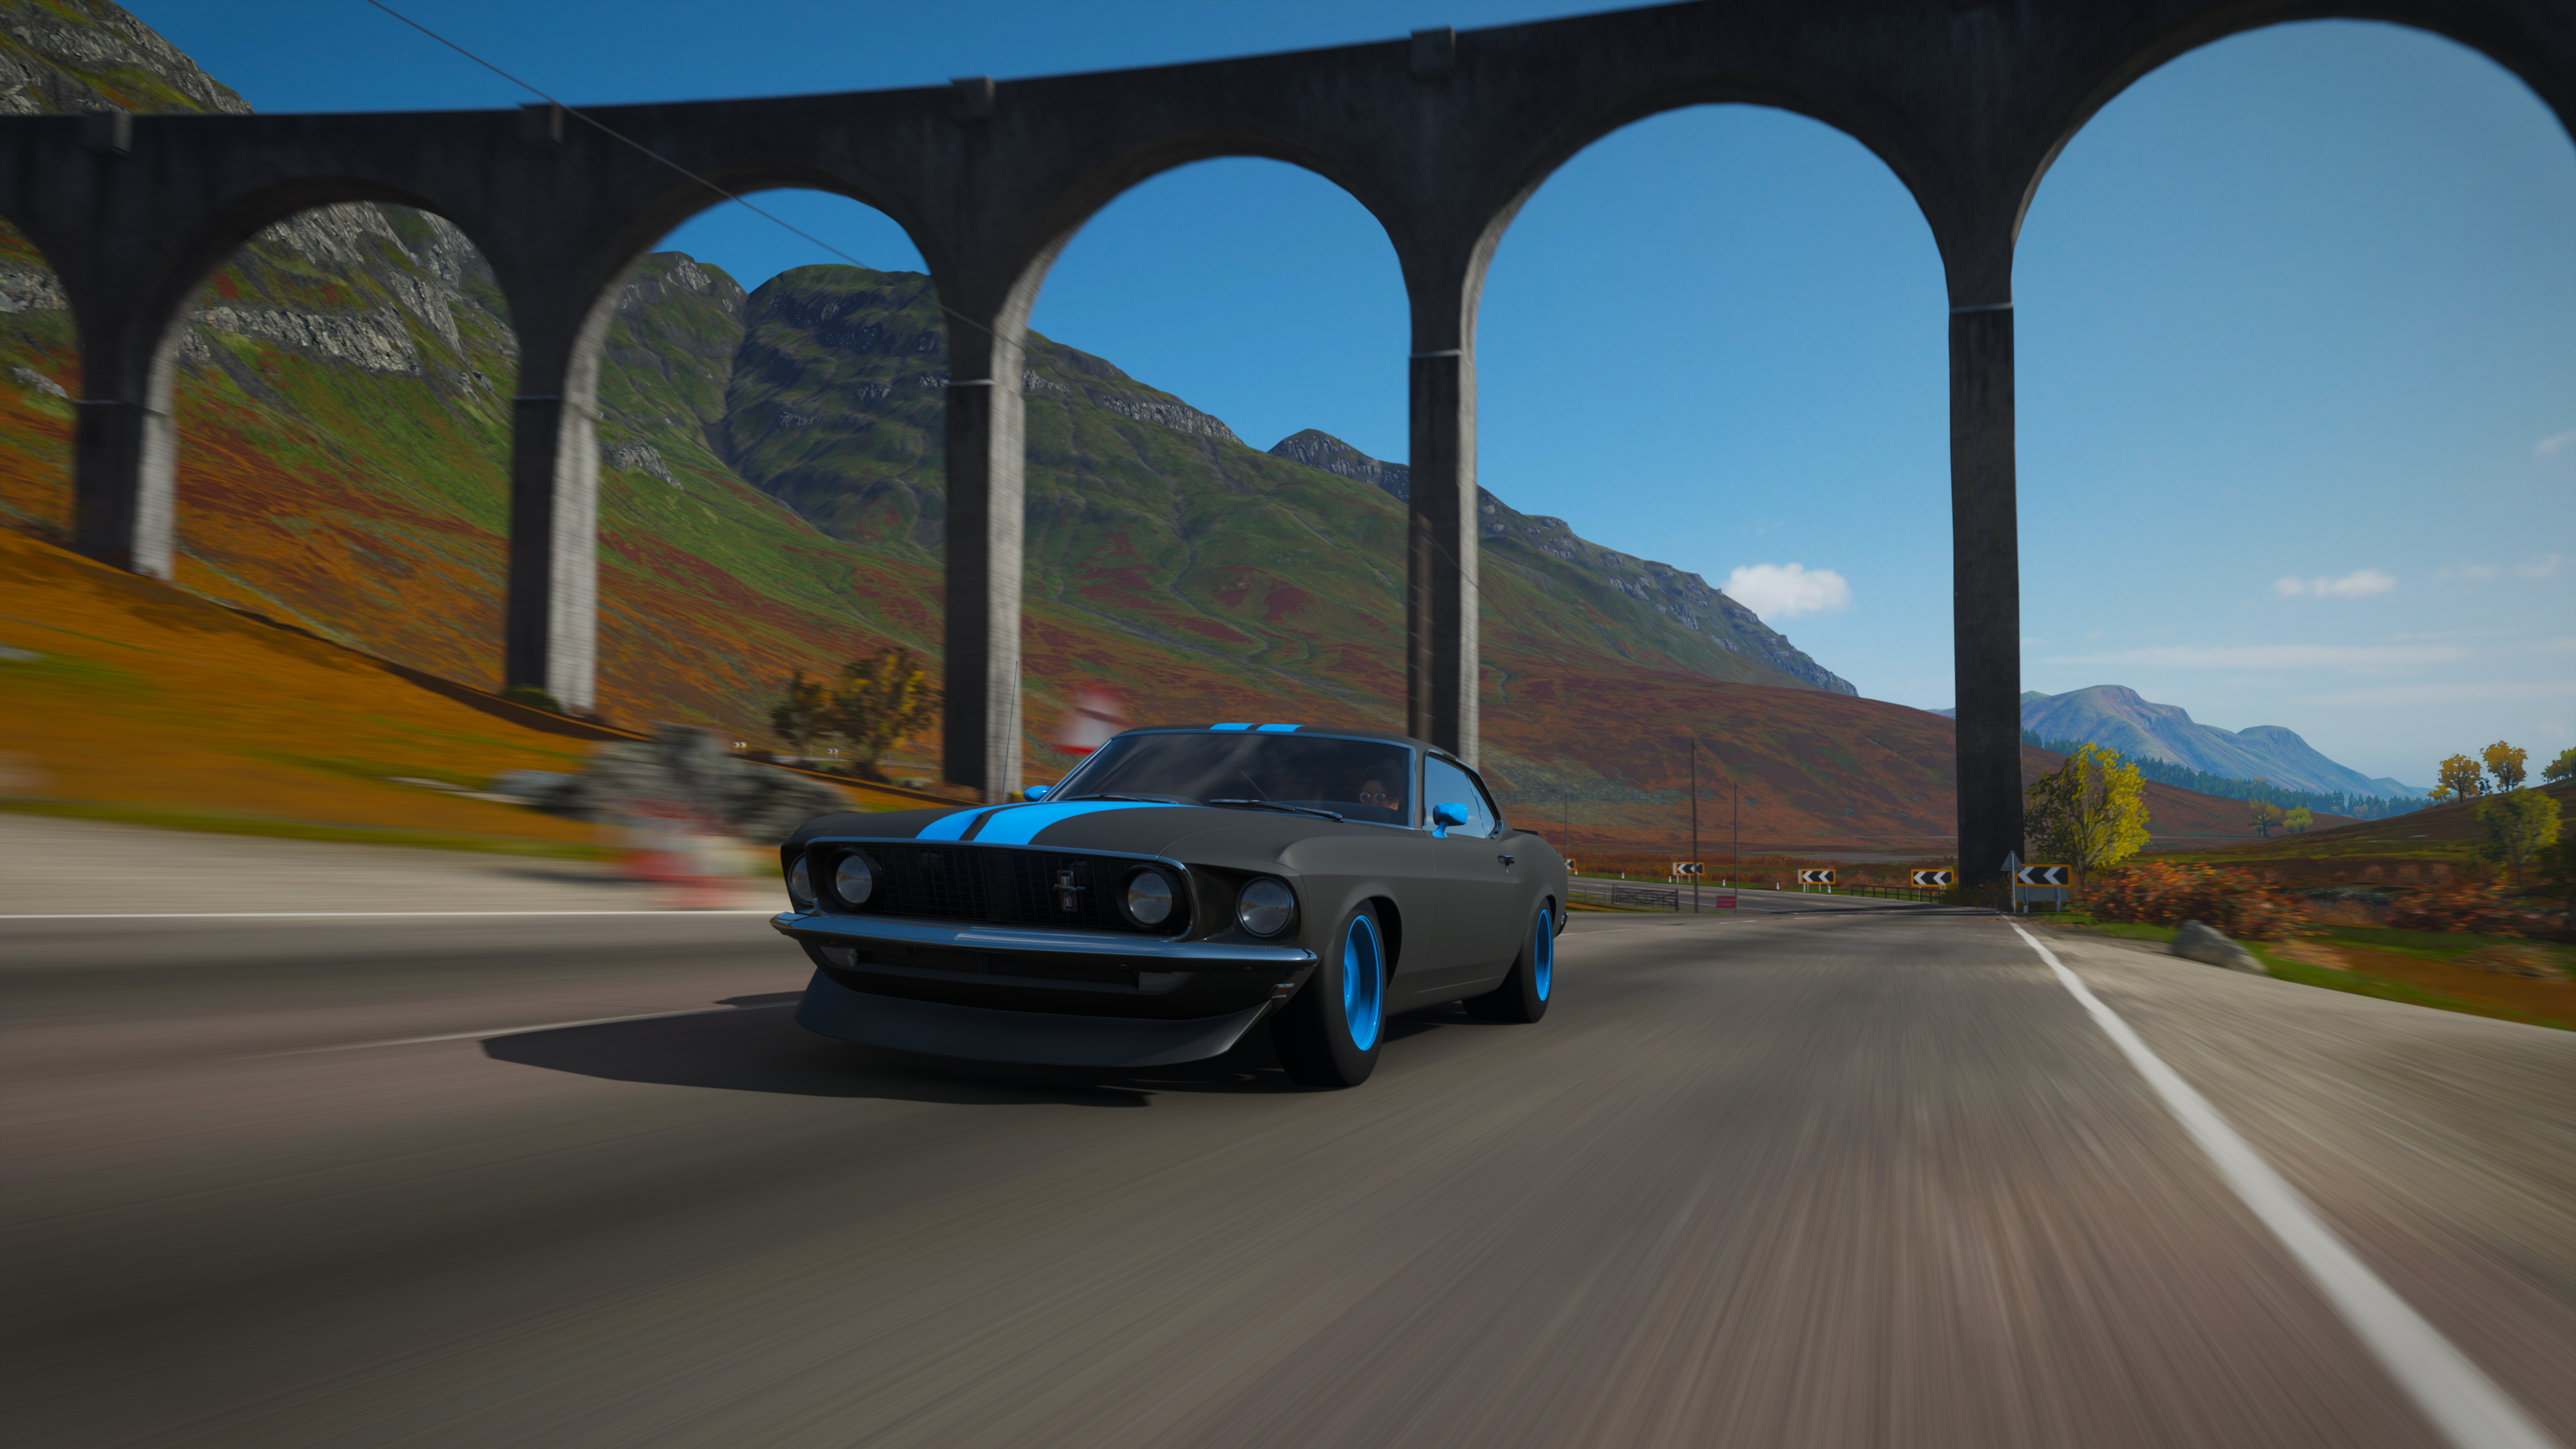 General 3840x2160 Forza Forza Horizon Forza Horizon 4 Ford Ford Mustang viaduct car Faster video games